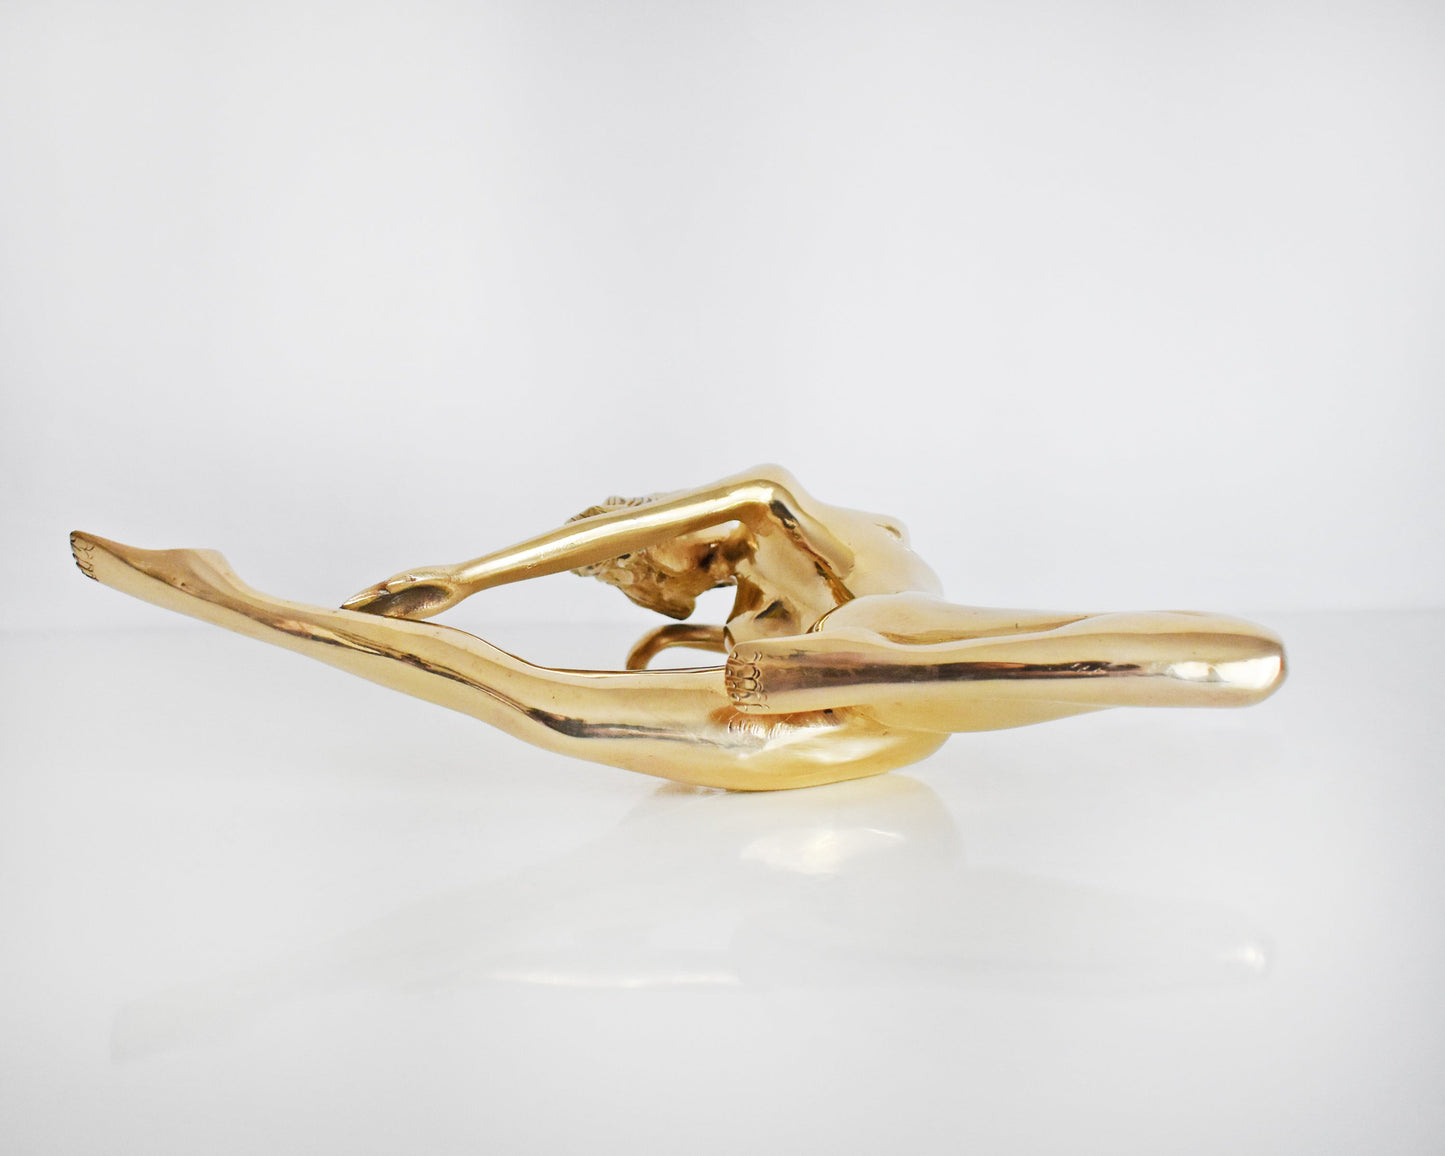 underside view of a vintage 1970s nude brass woman that is posed with one arm bent, another stretched behind her, and one leg also stretched out and the other leg is bent at the knee.  